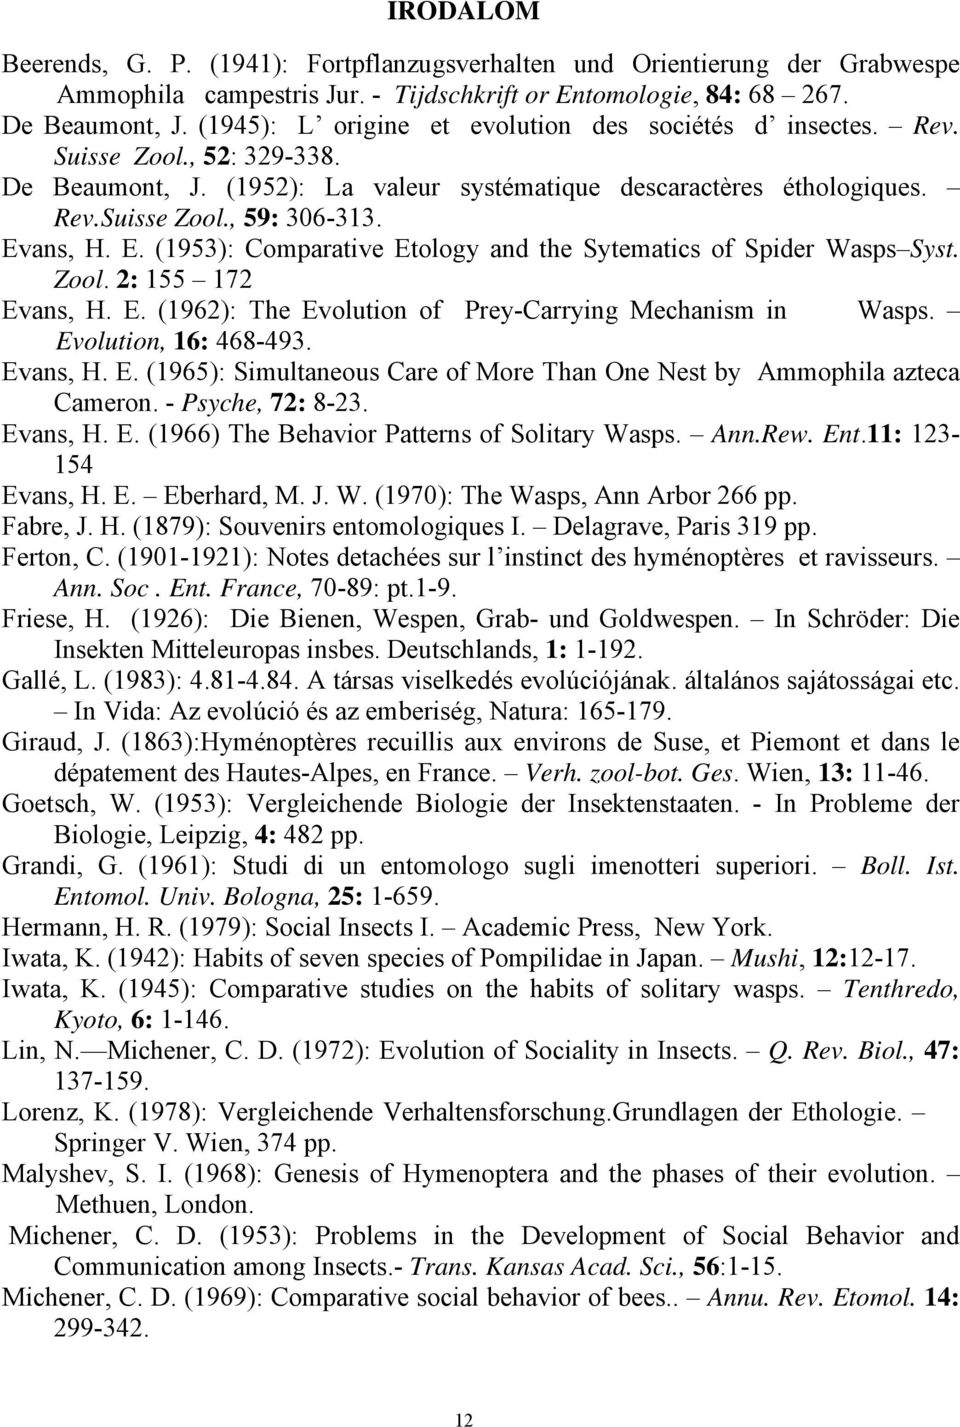 Evans, H. E. (1953): Comparative Etology and the Sytematics of Spider Wasps Syst. Zool. 2: 155 172 Evans, H. E. (1962): The Evolution of Prey-Carrying Mechanism in Wasps. Evolution, 16: 468-493.